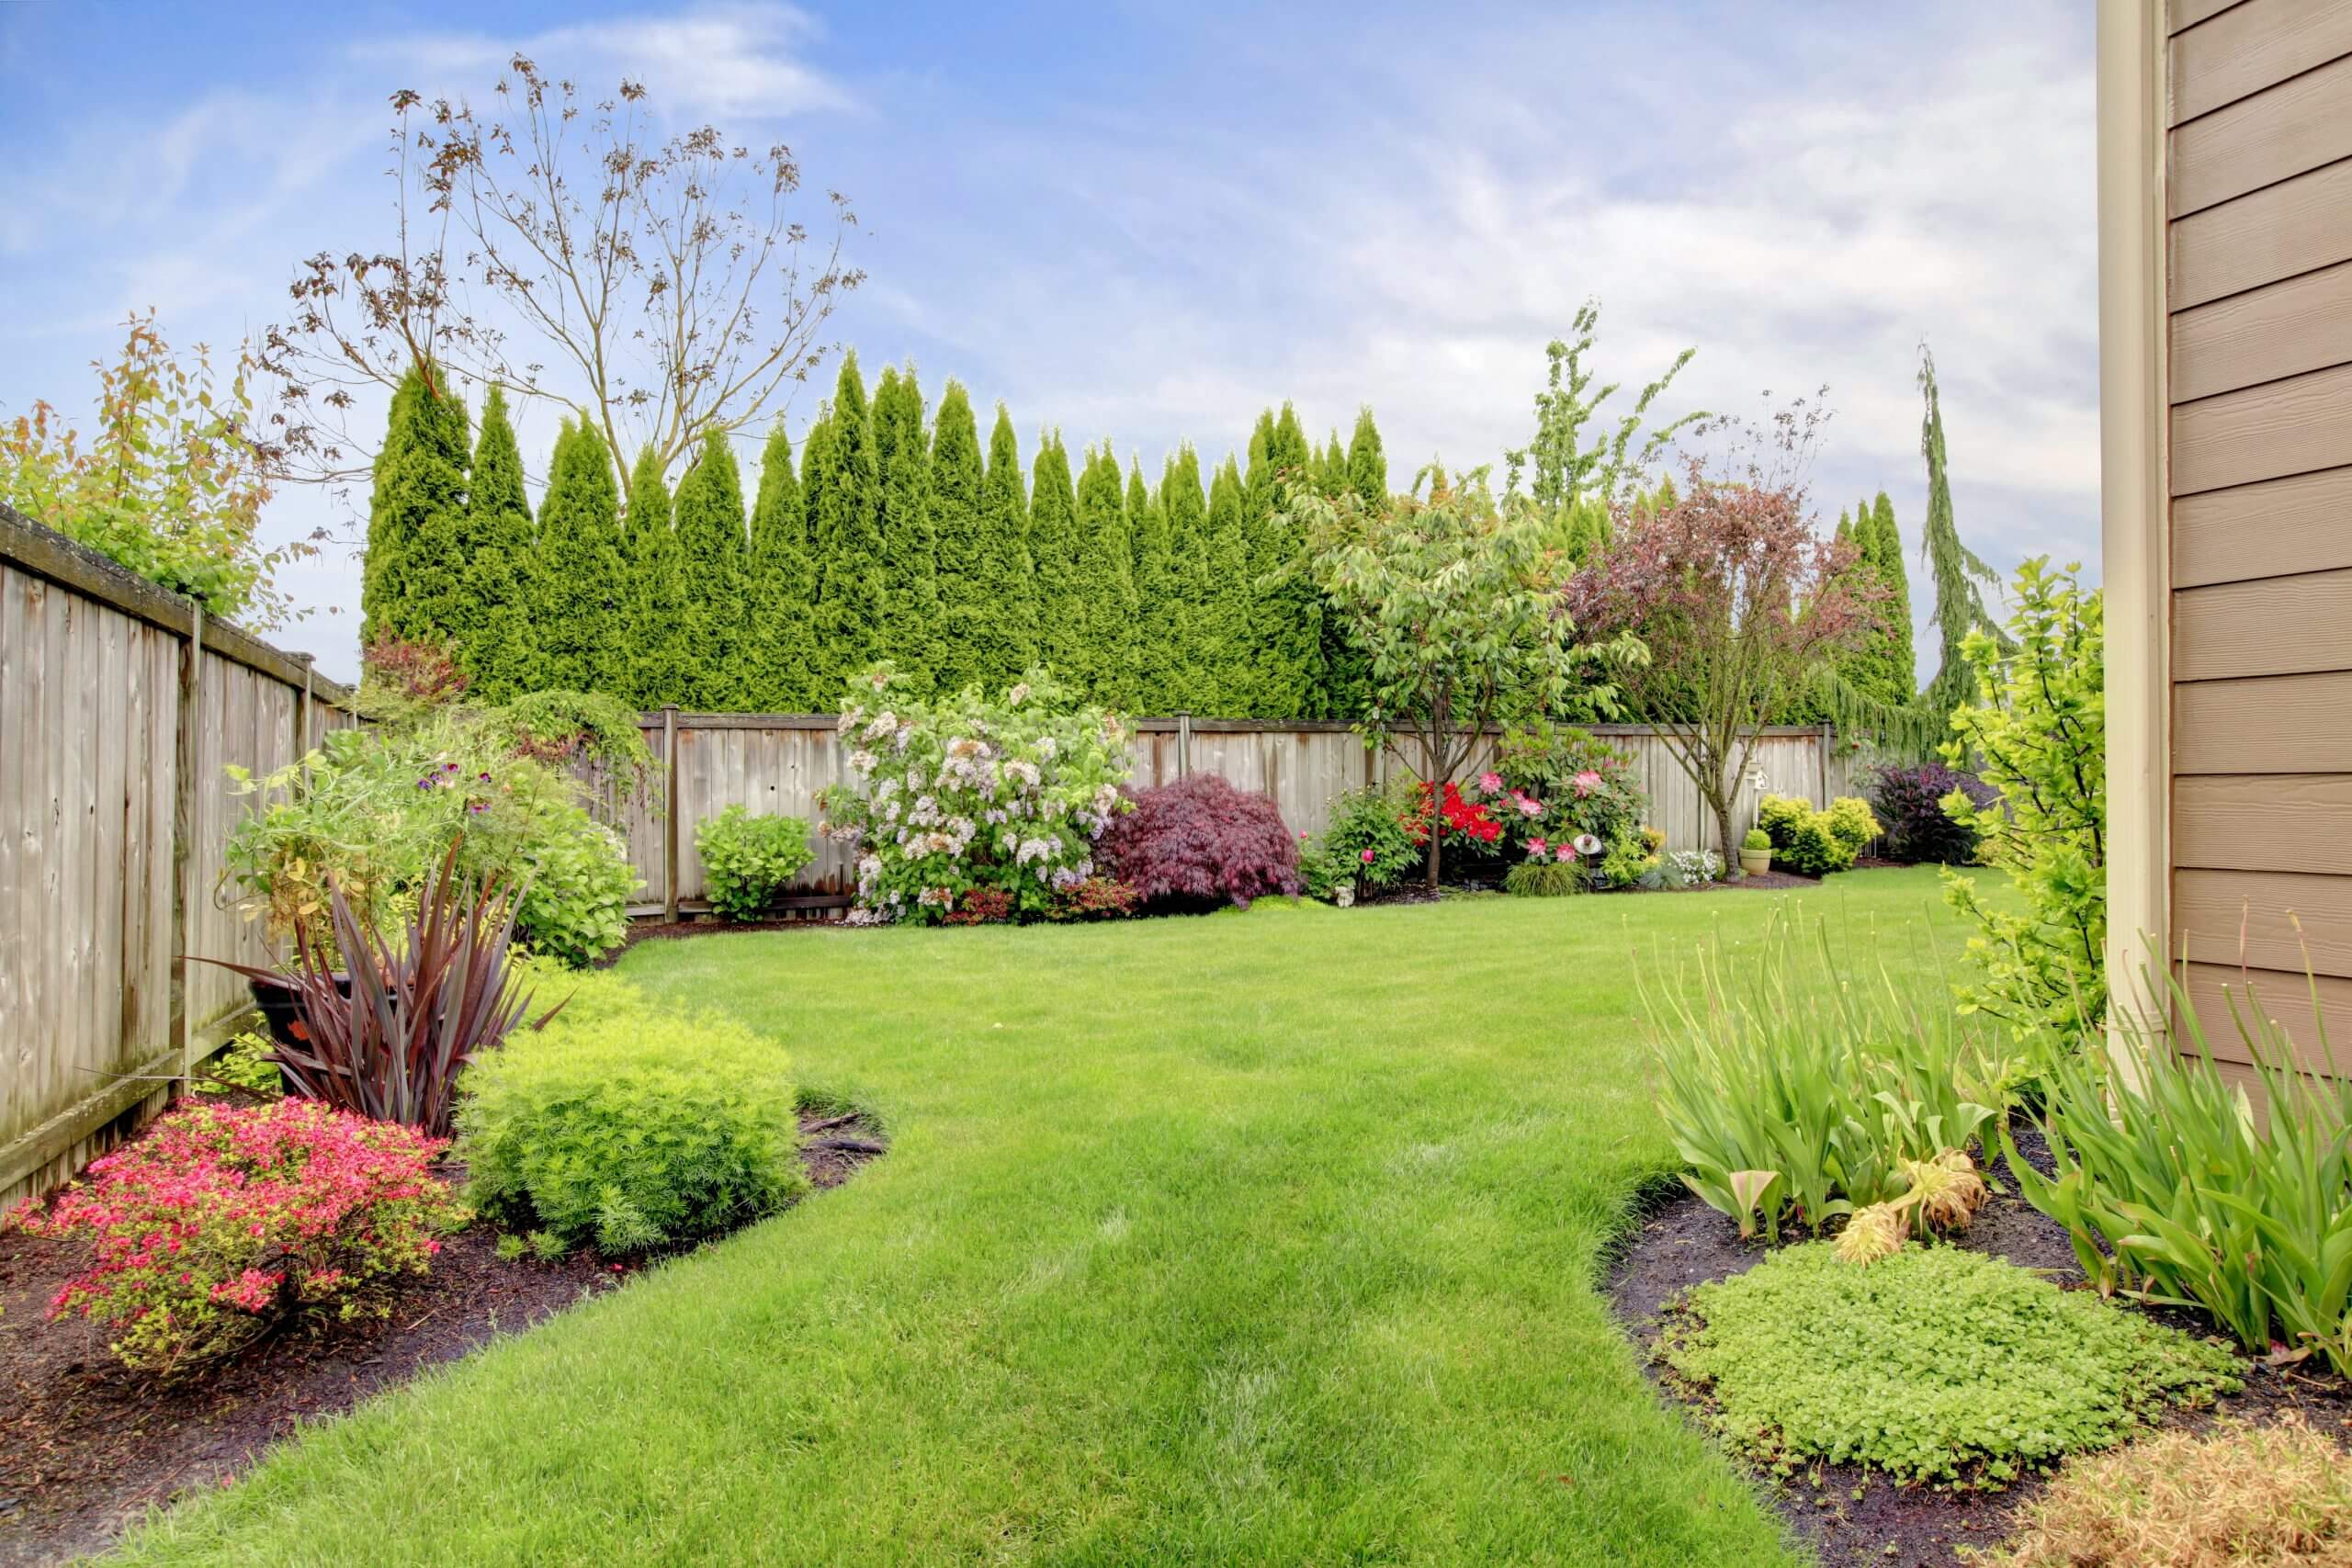 How Do I Landscape My Yard For Privacy